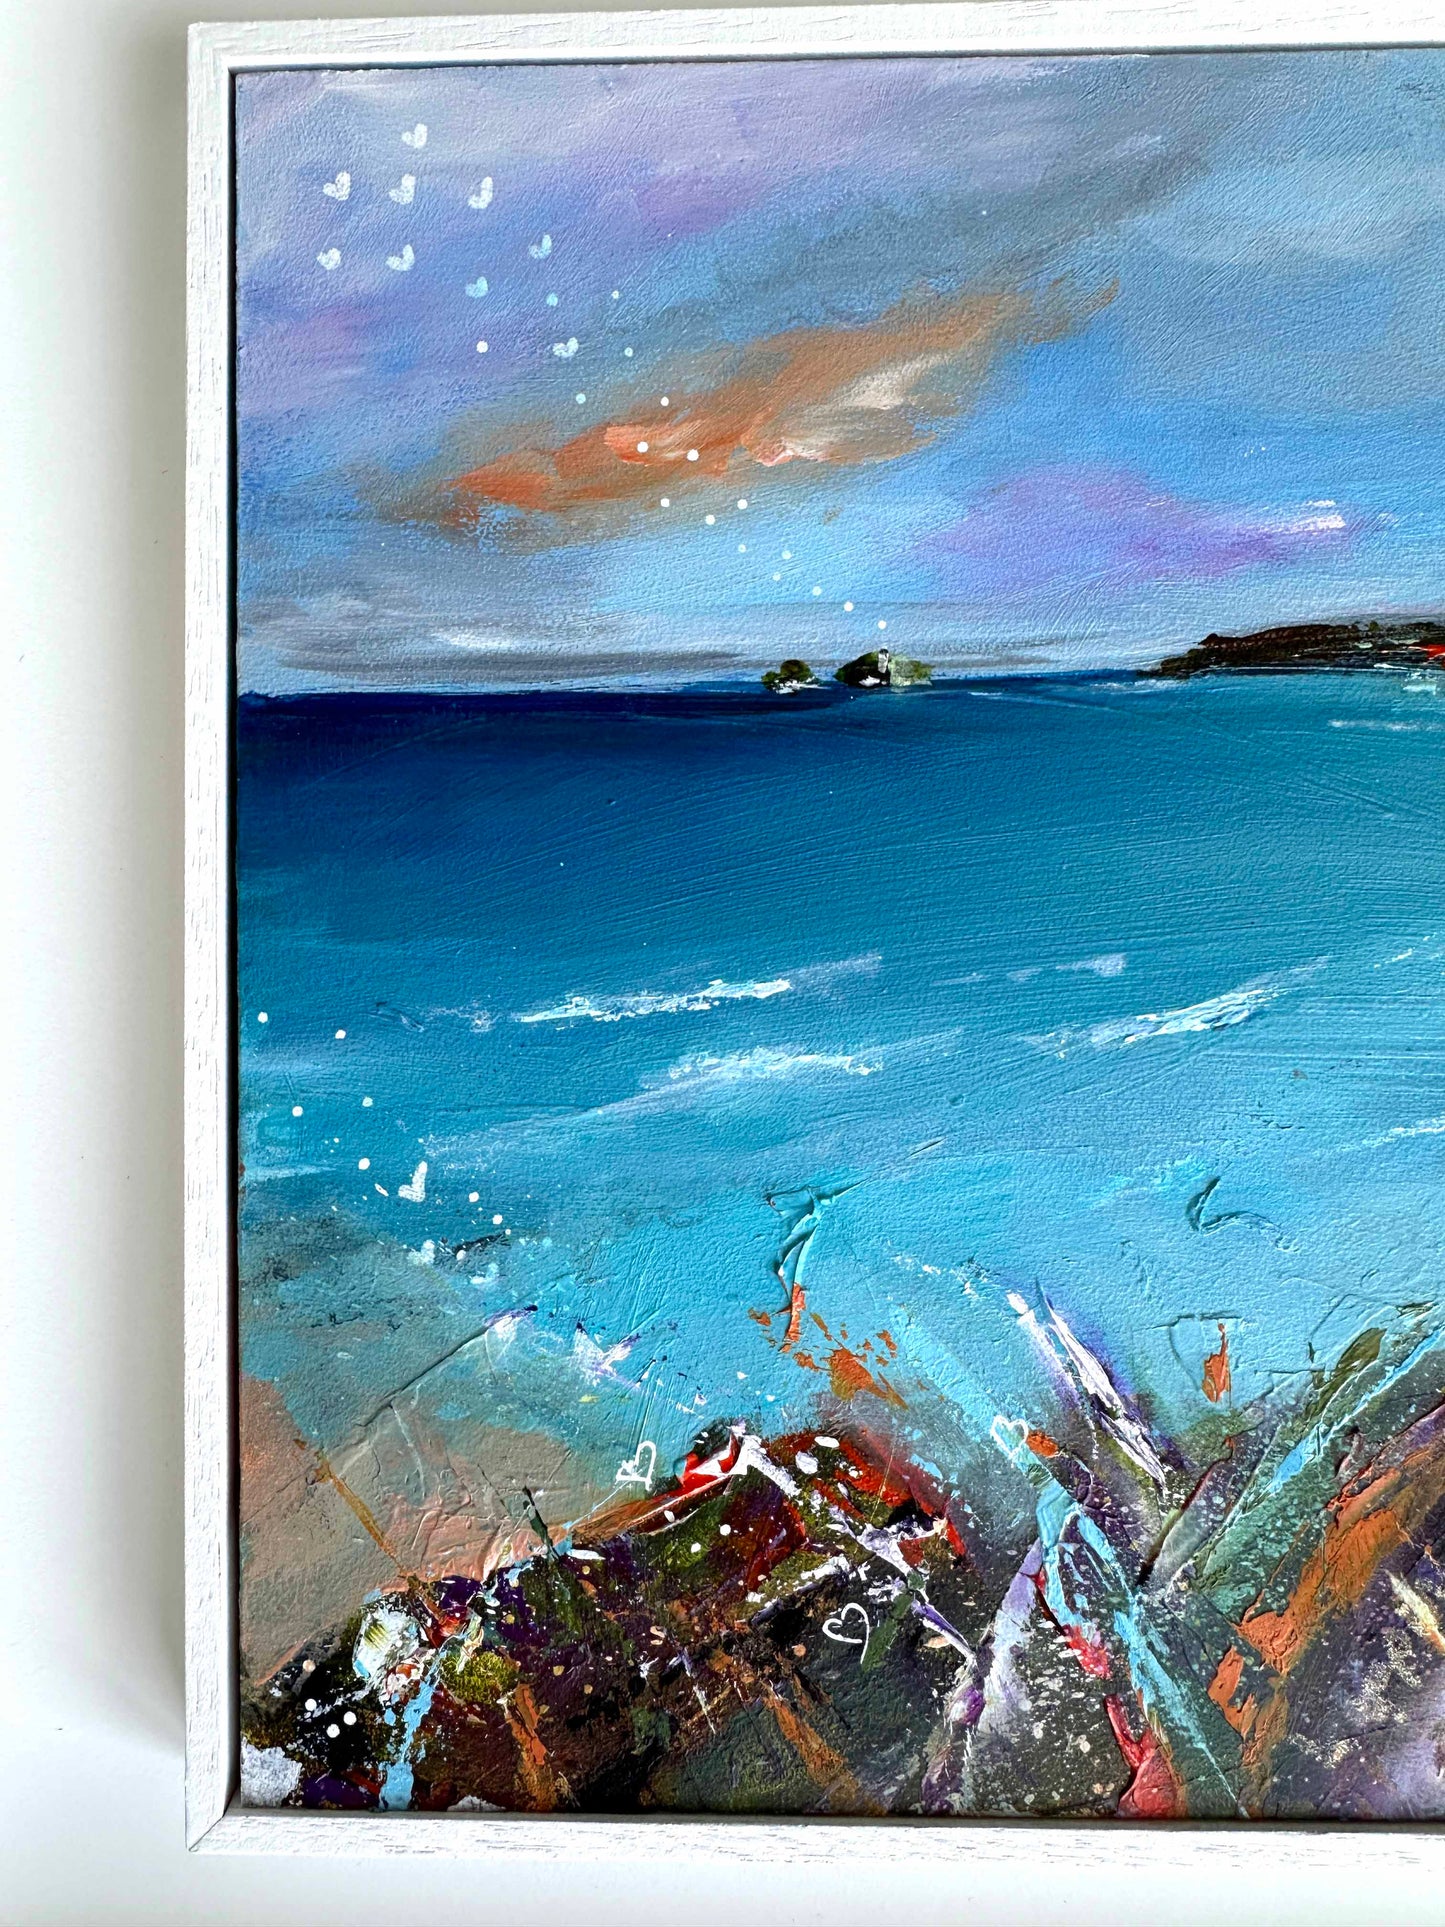 "Happiness Lies Within" Original Seascape Painting